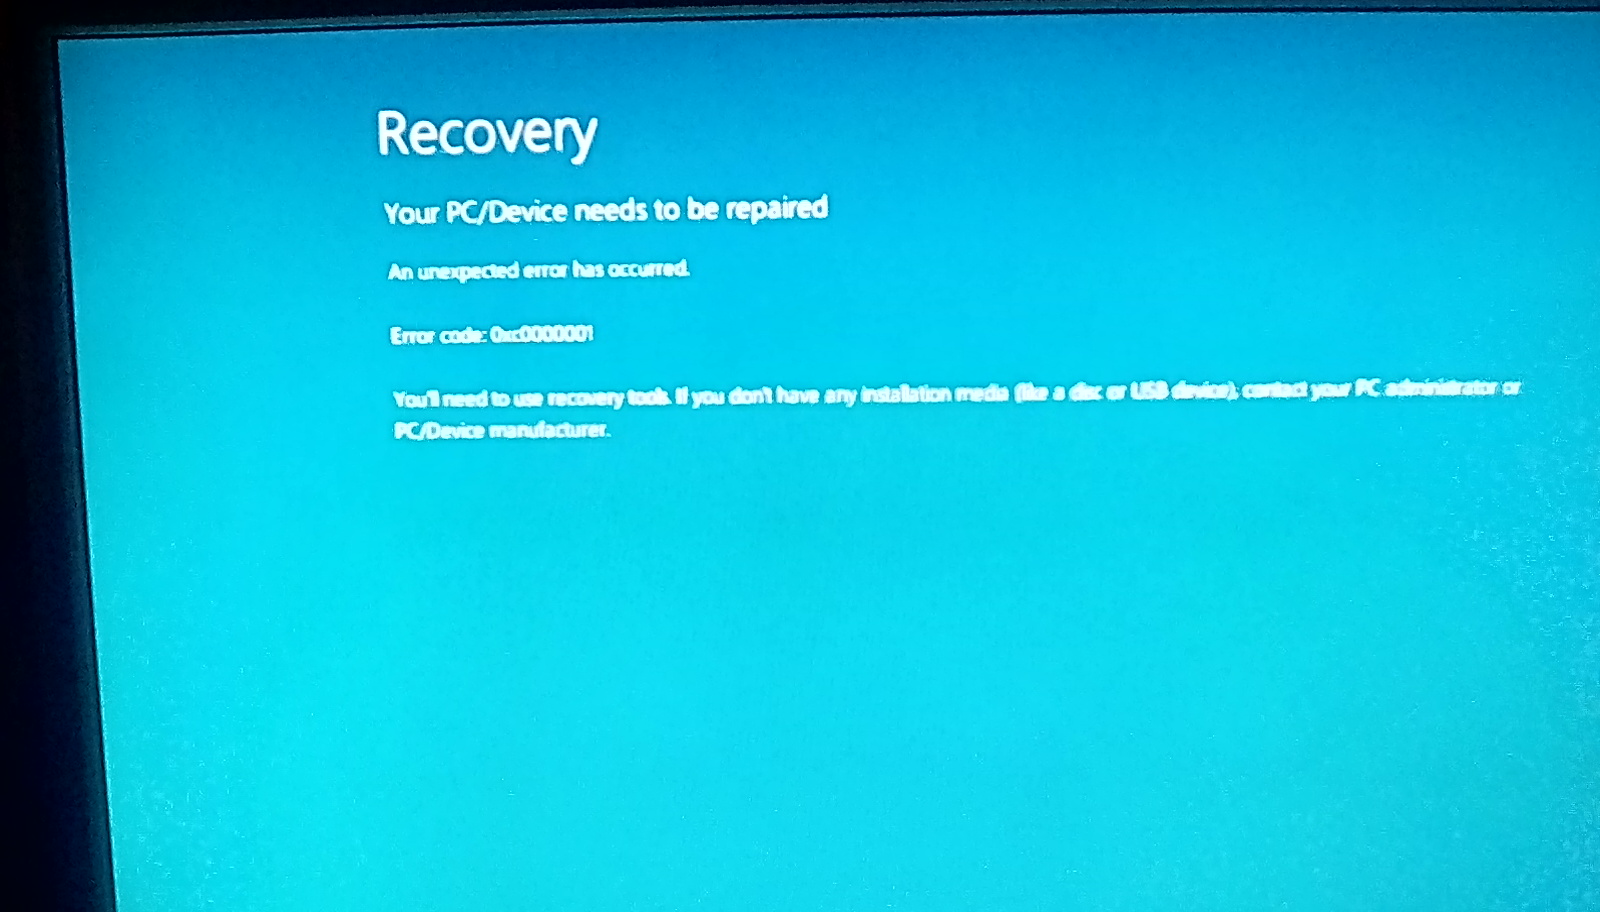 Pc need to be repaired windows 10